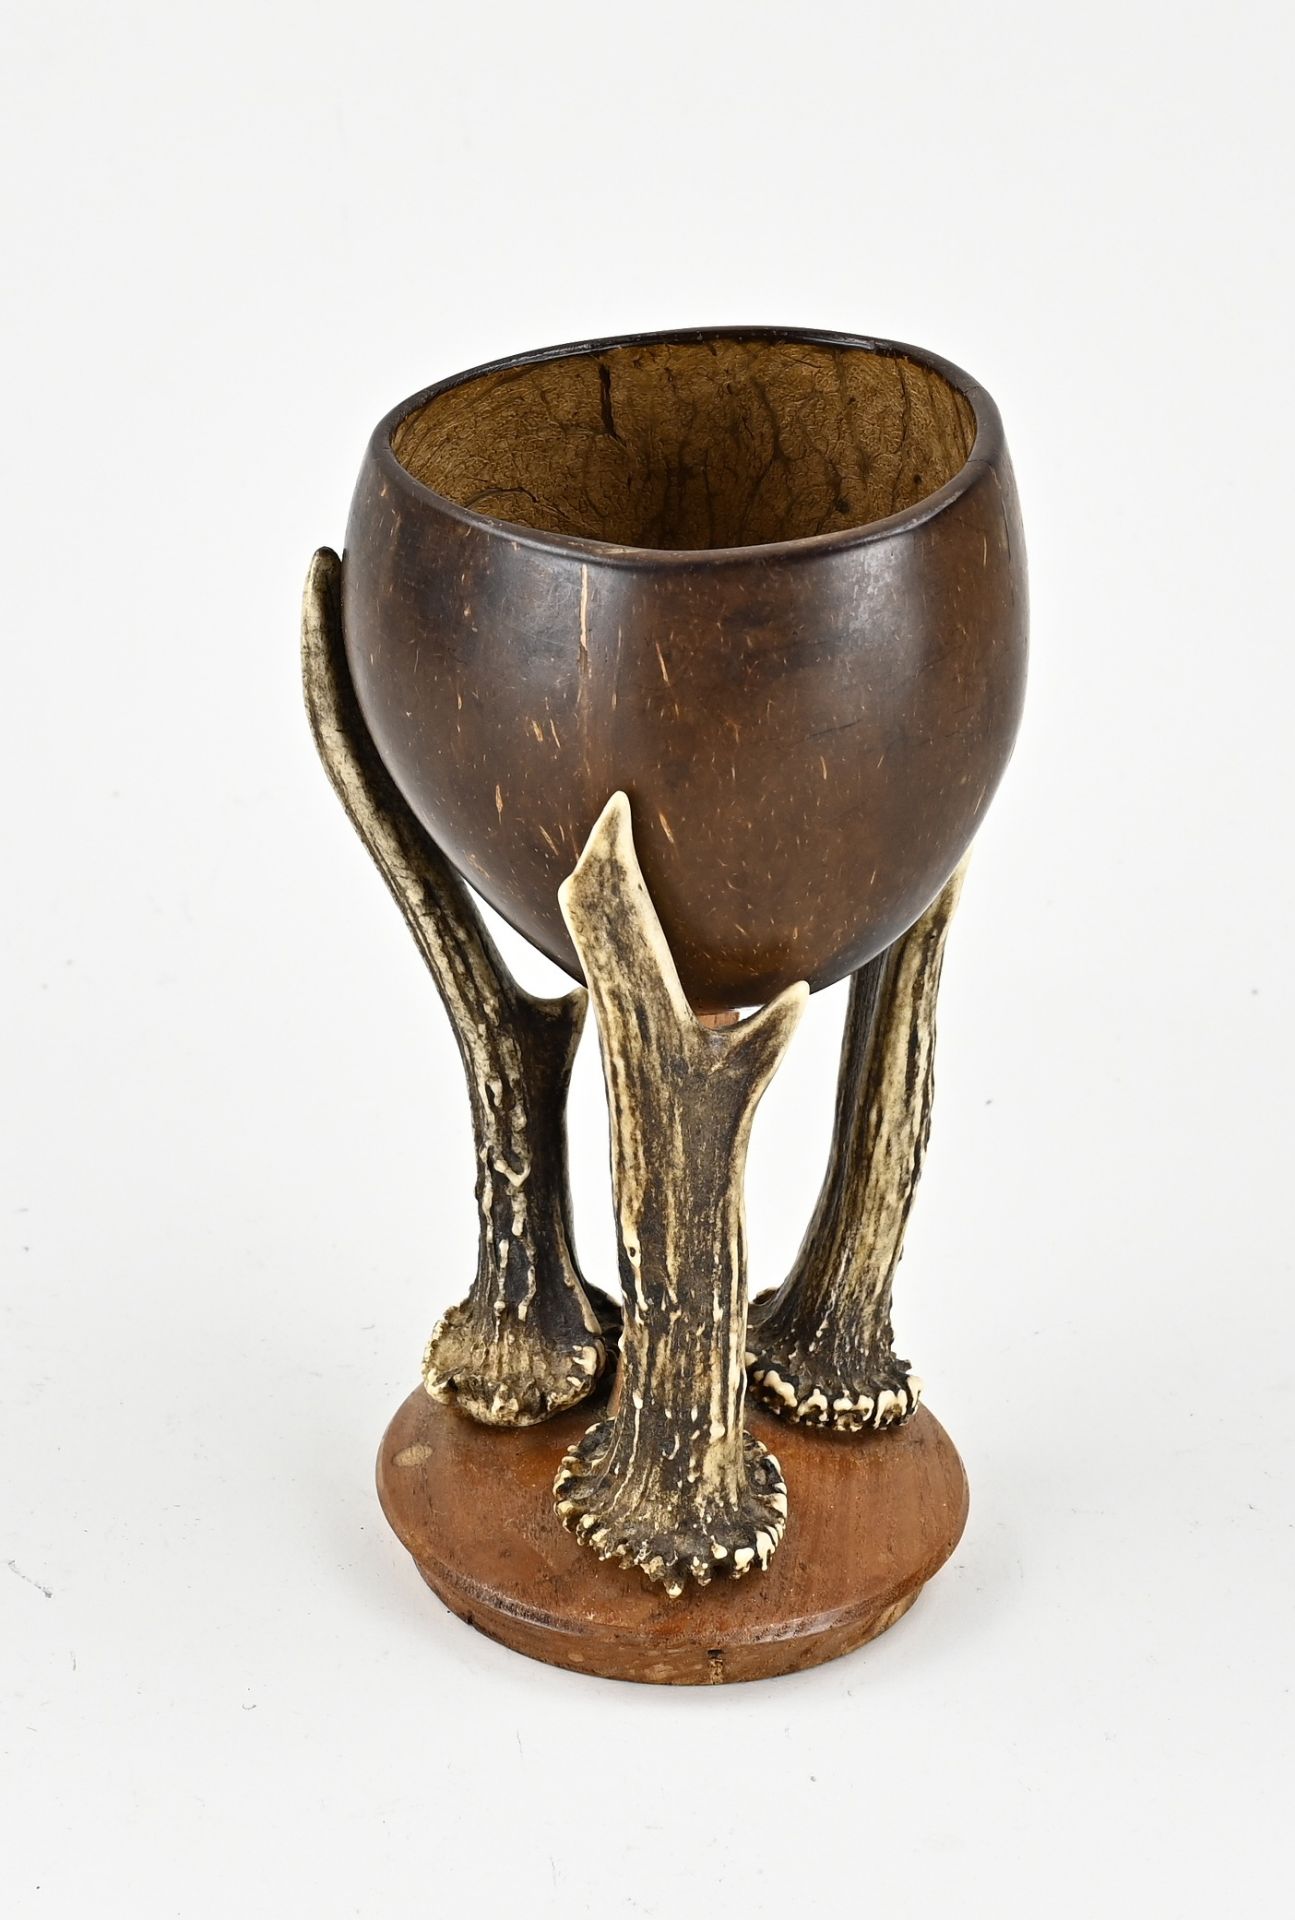 Goblet made of antlers + coconut